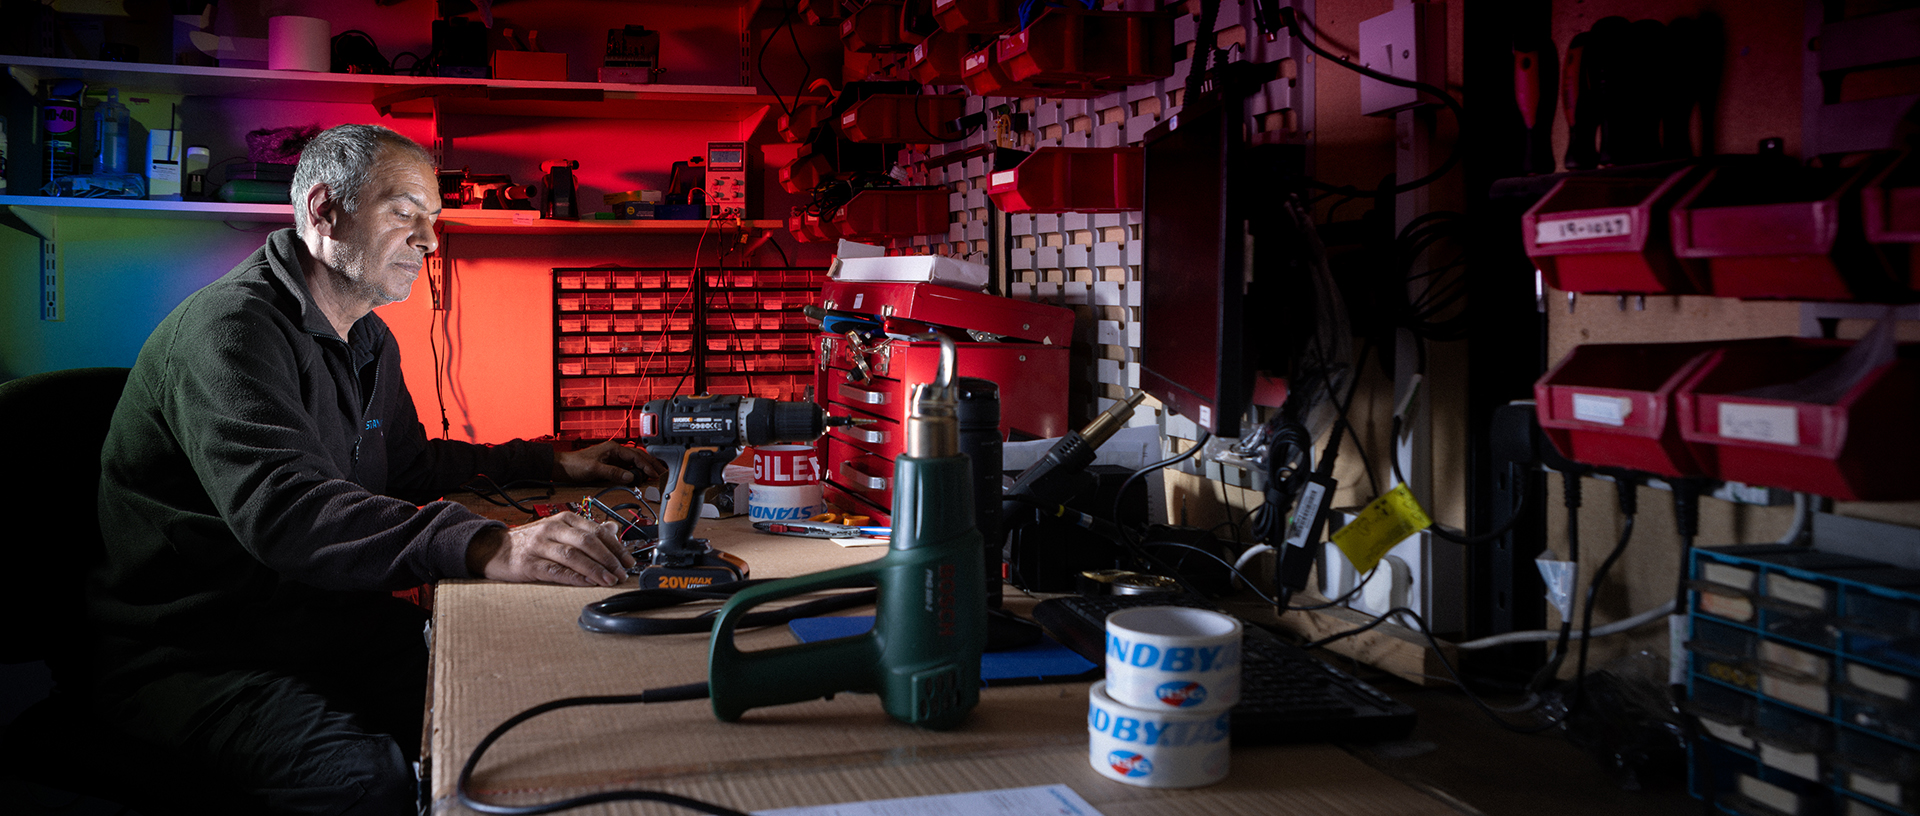 Side on of a worker seated at workbench against a red lit background working on a technical task in a workshop